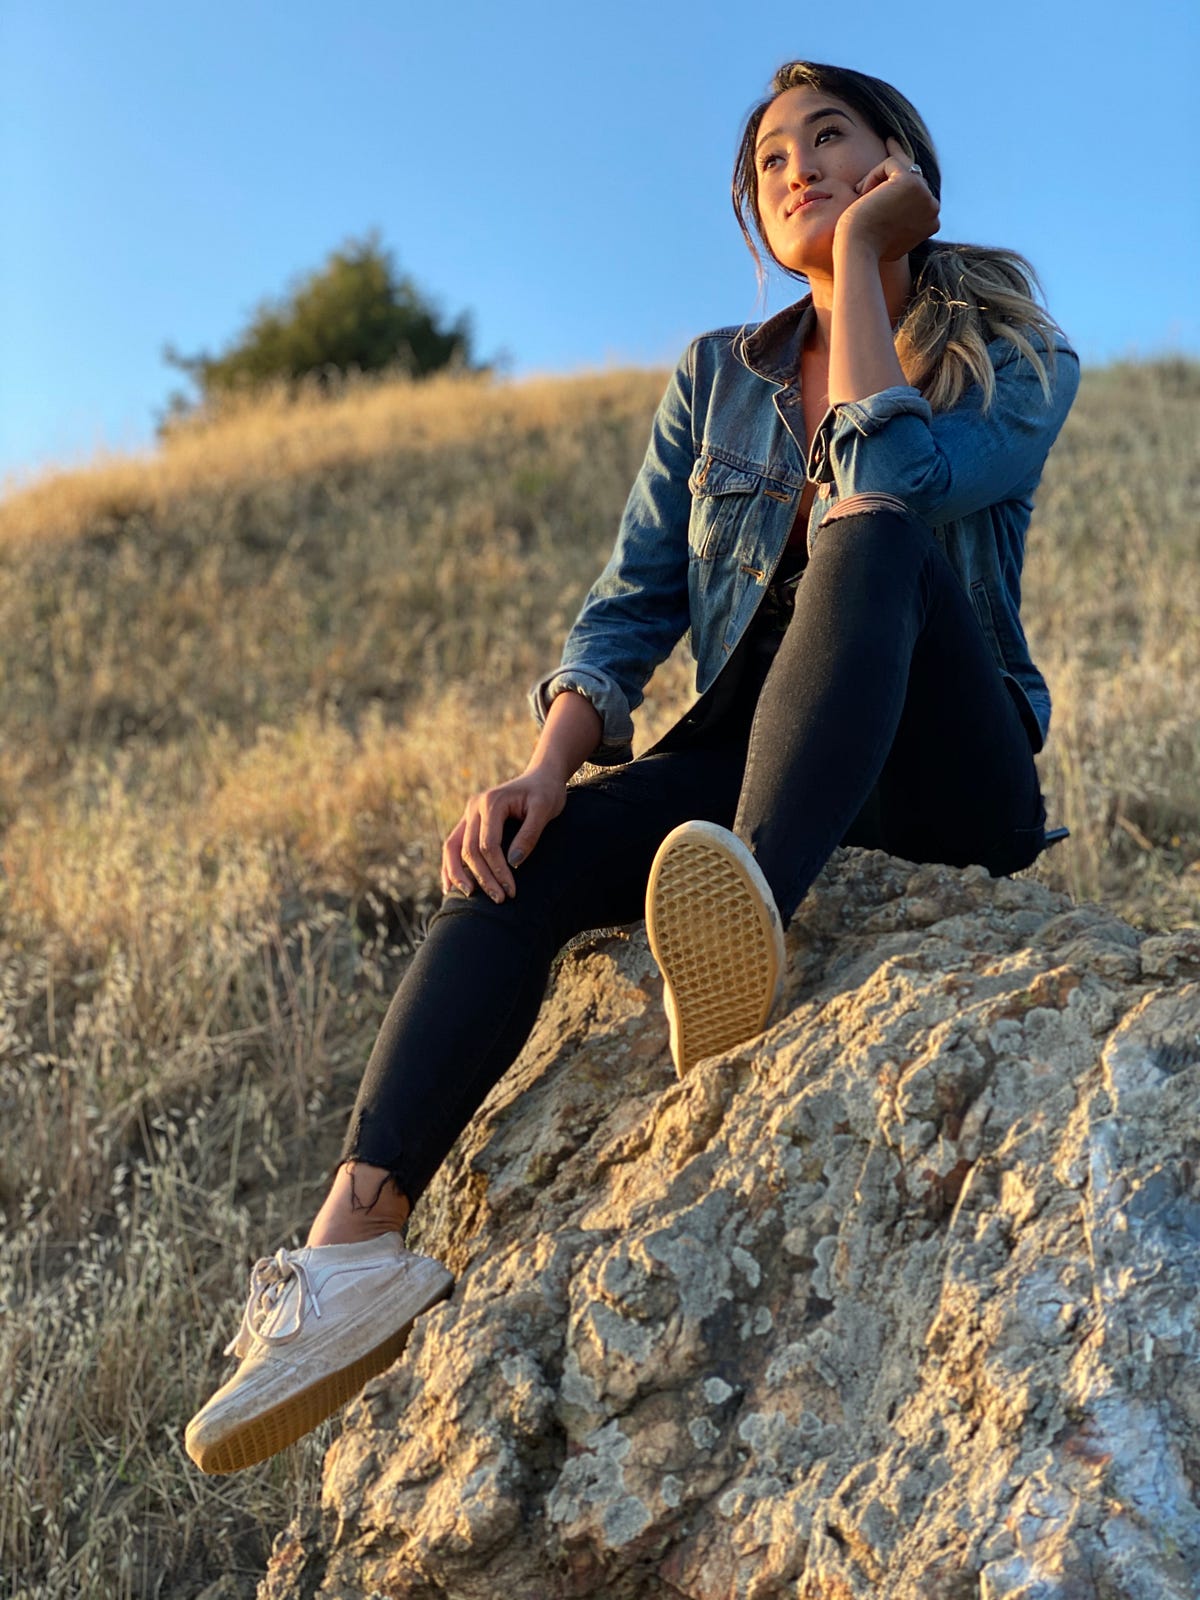 Portraits in the East Bay Hills with Jazelyn Cabral | by Aidan Guthrie ...